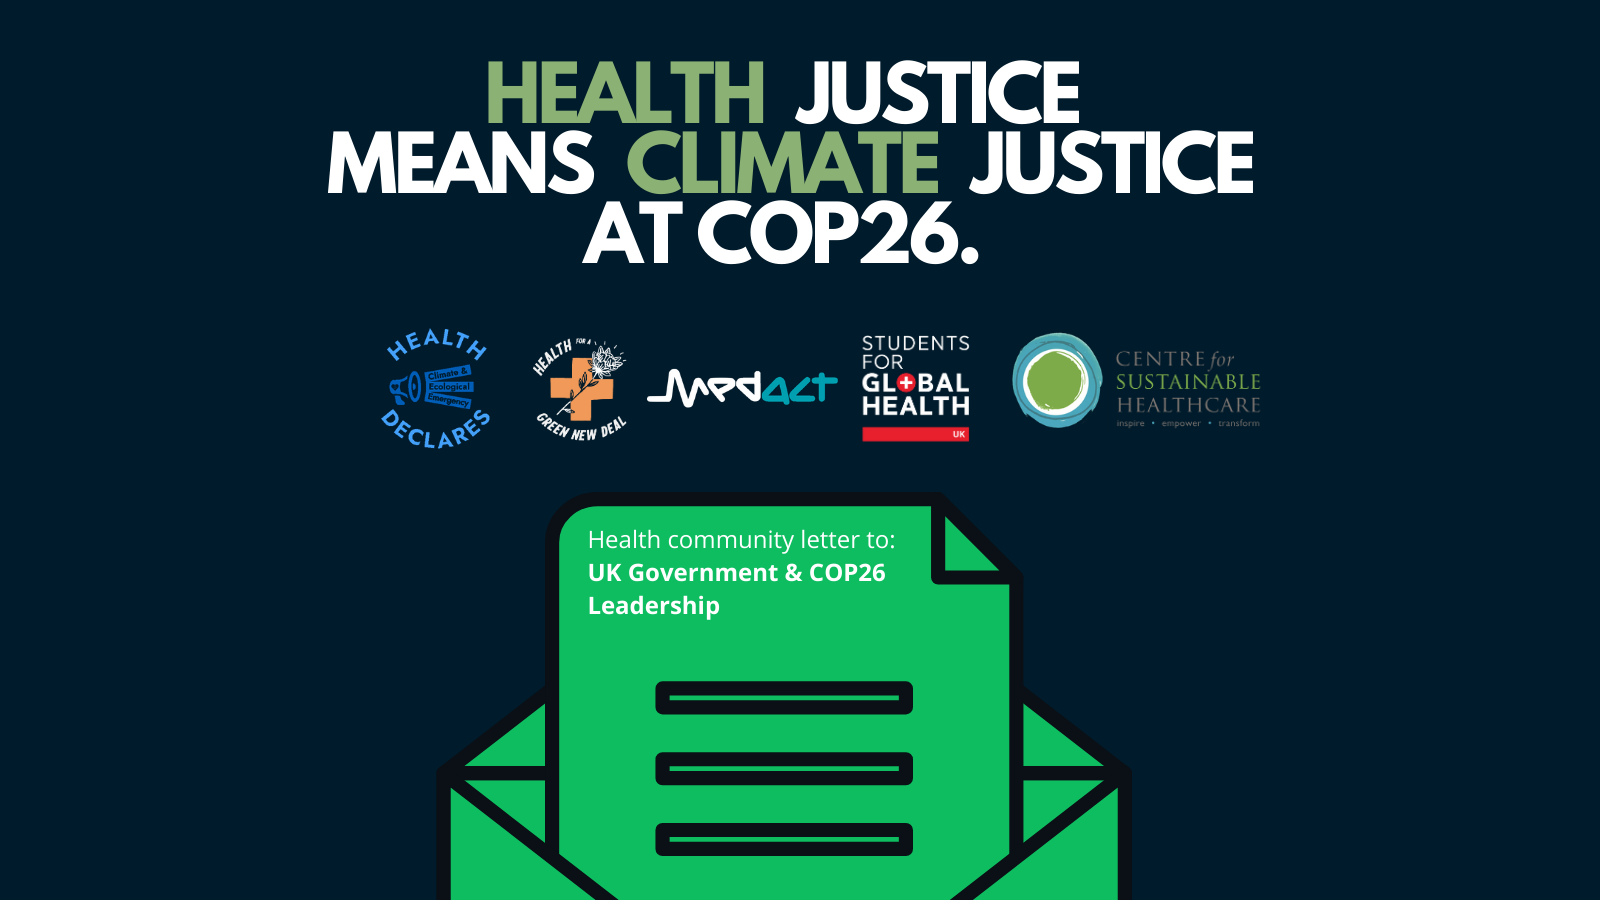 Health justice means climate justice at COP26